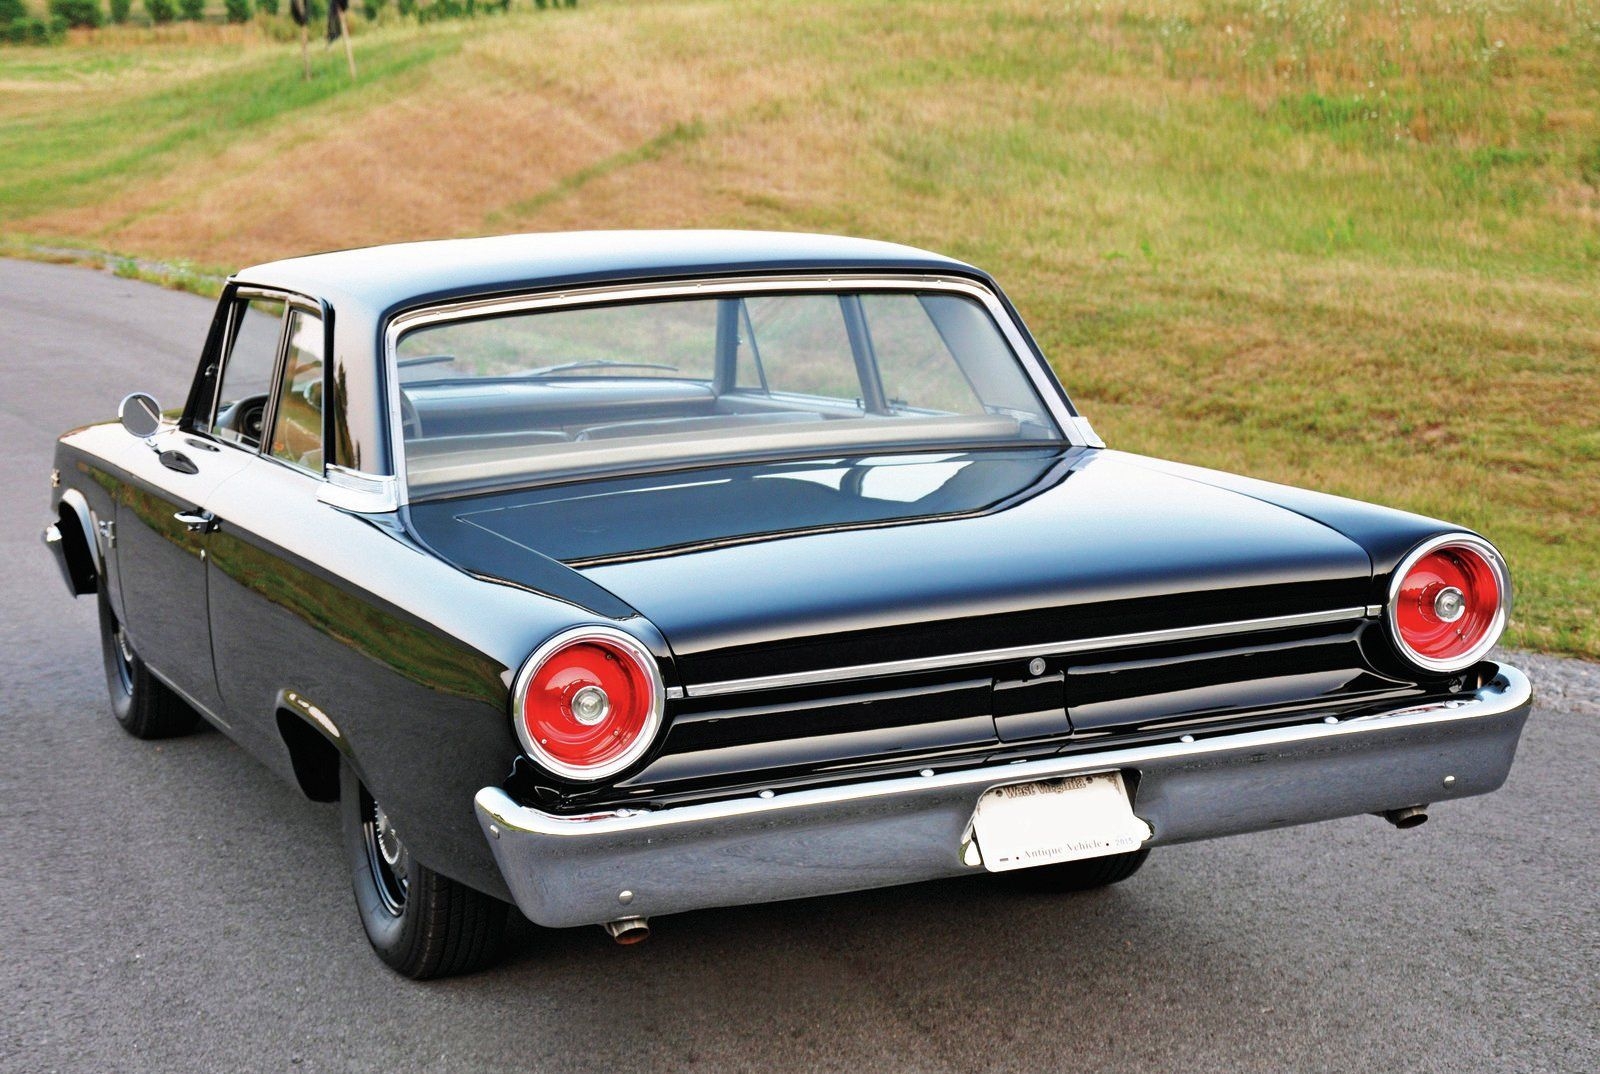 Ford Fairlane 500 Xl Wallpapers